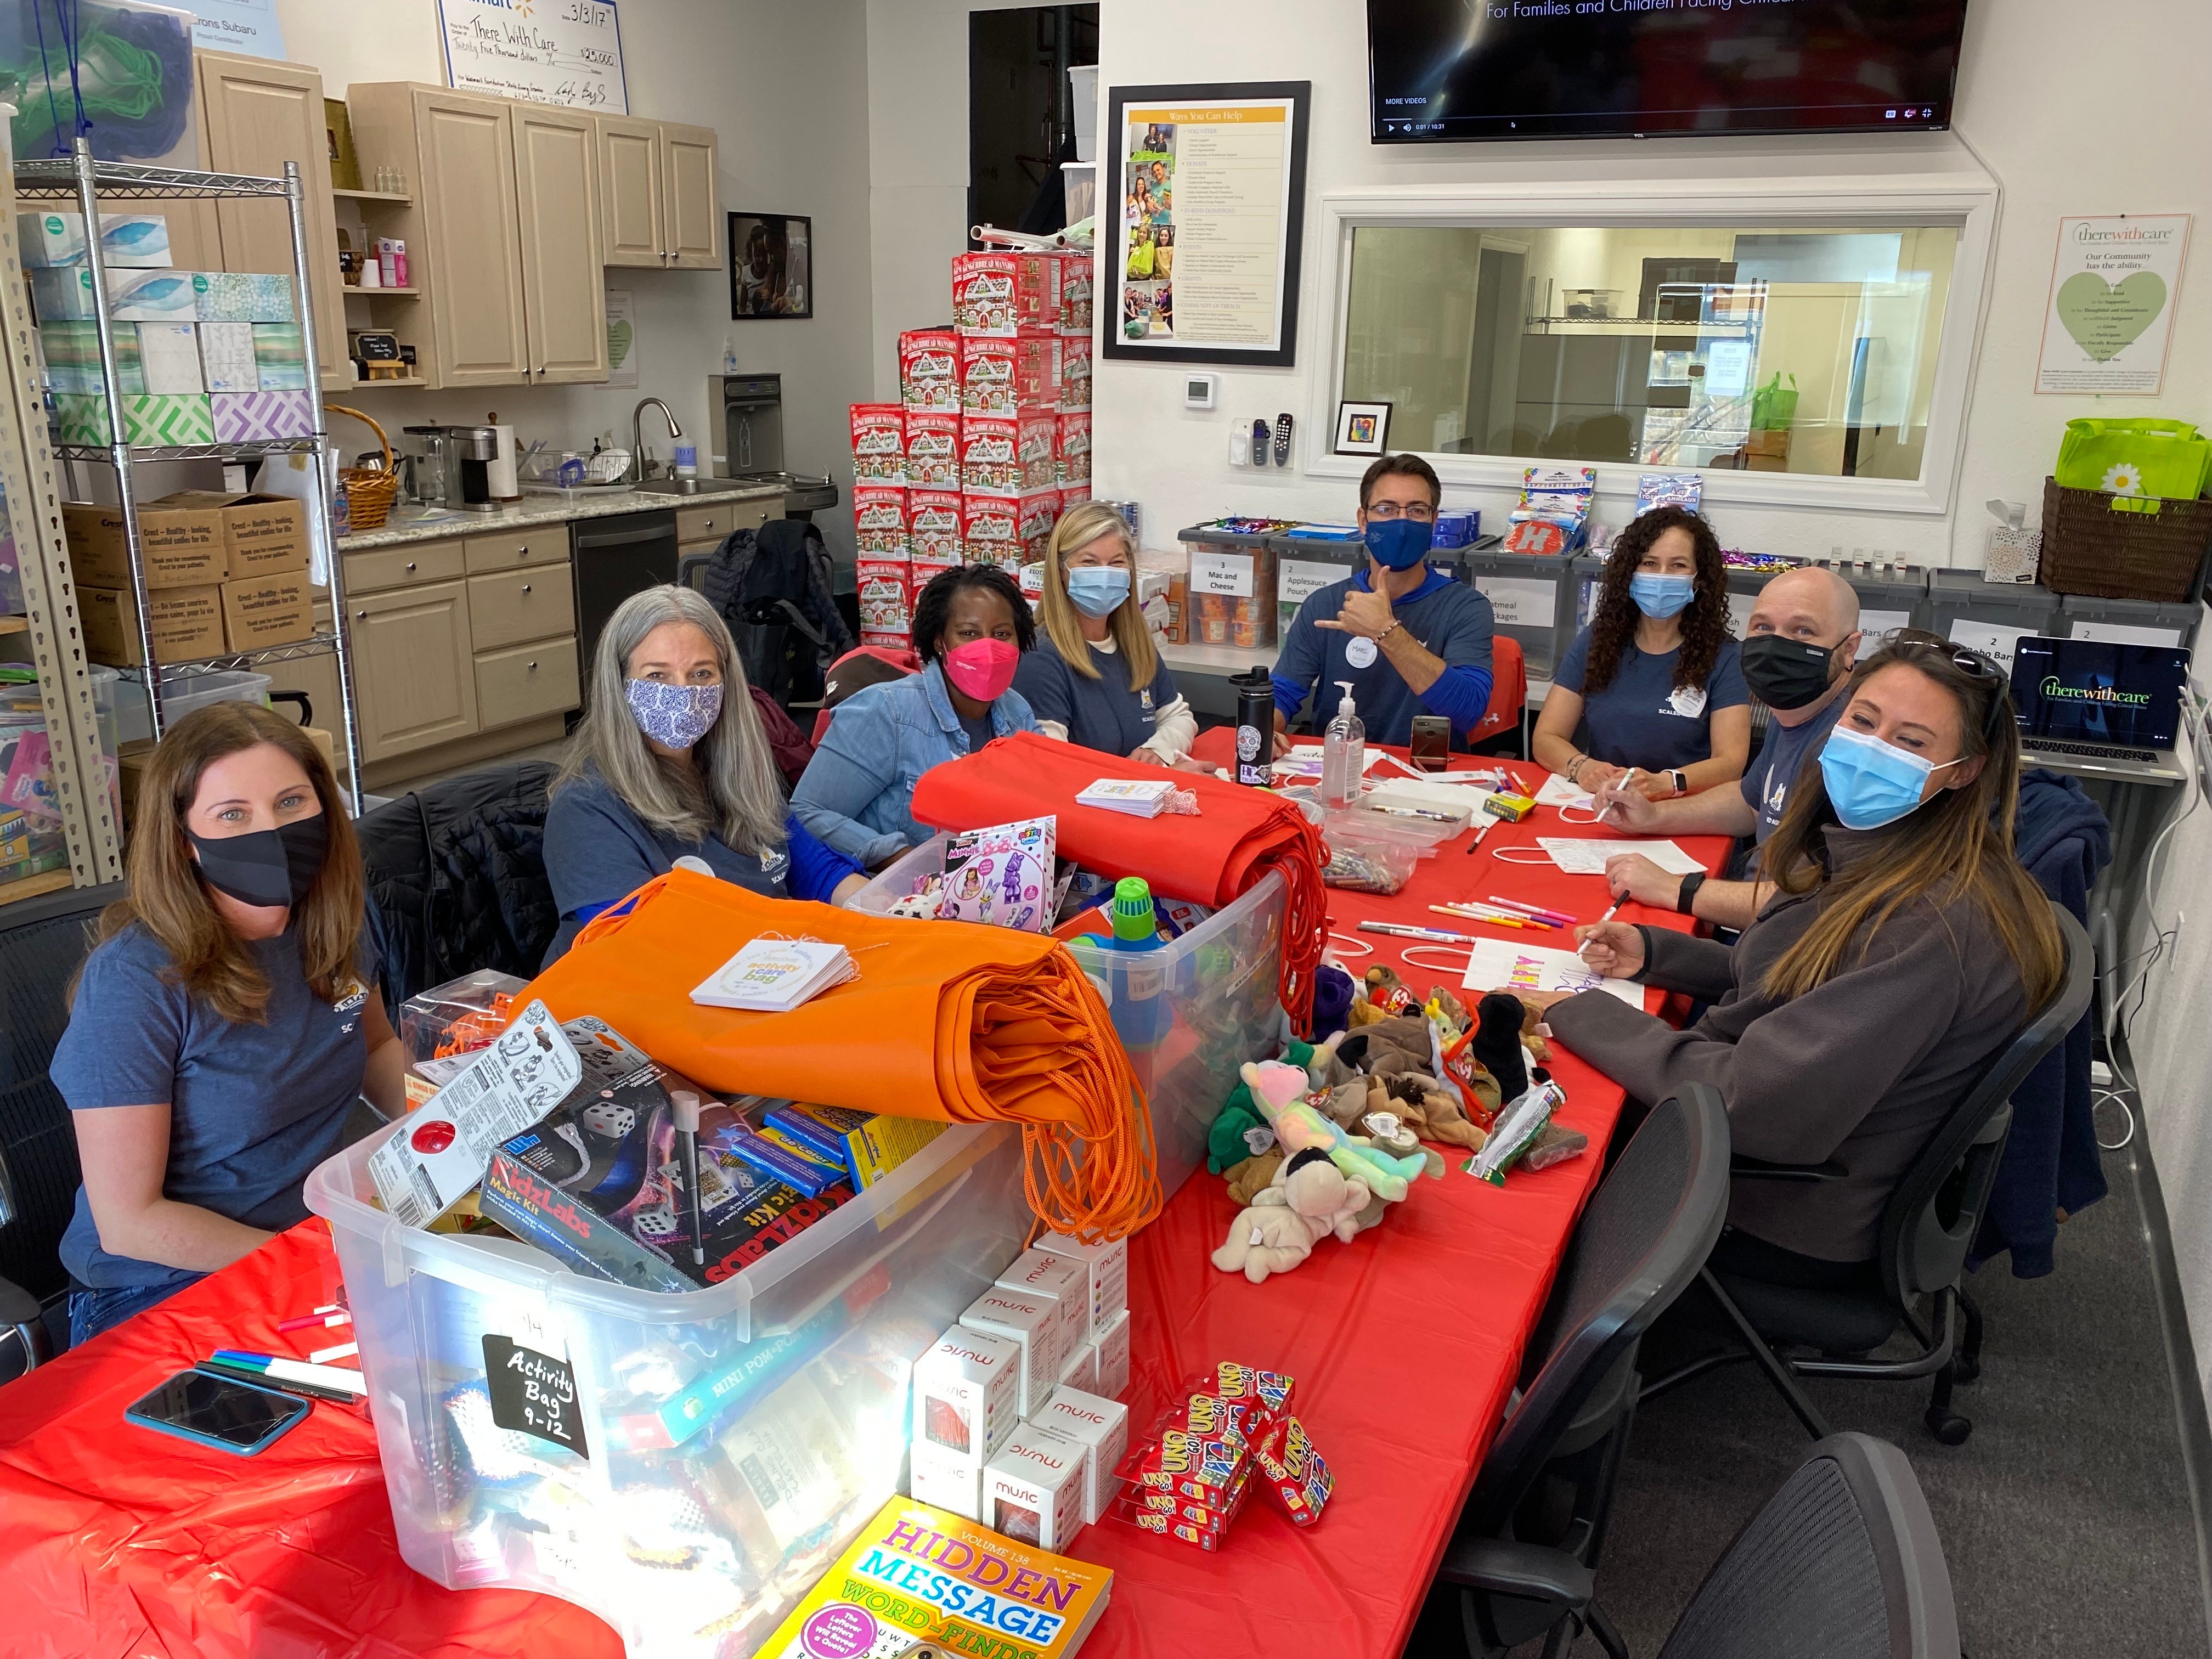 A group of individuals sitting around a table in masks, working on gifts for children.